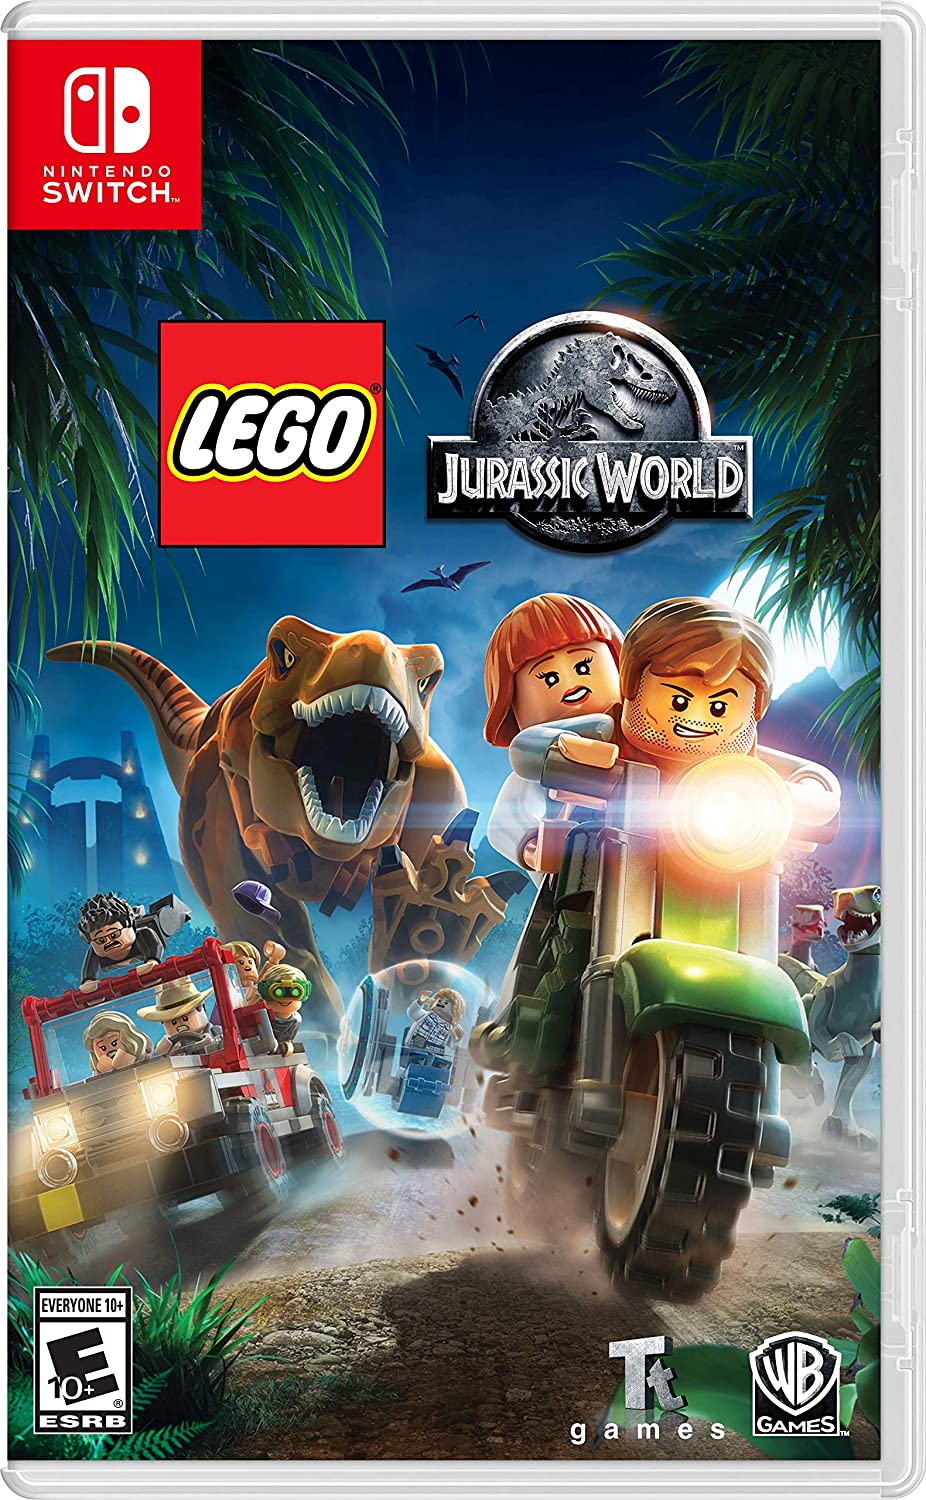 Amazon - Select Nintendo Switch Lego Game Titles - $16.99 + Free Shipping for Prime or $35+